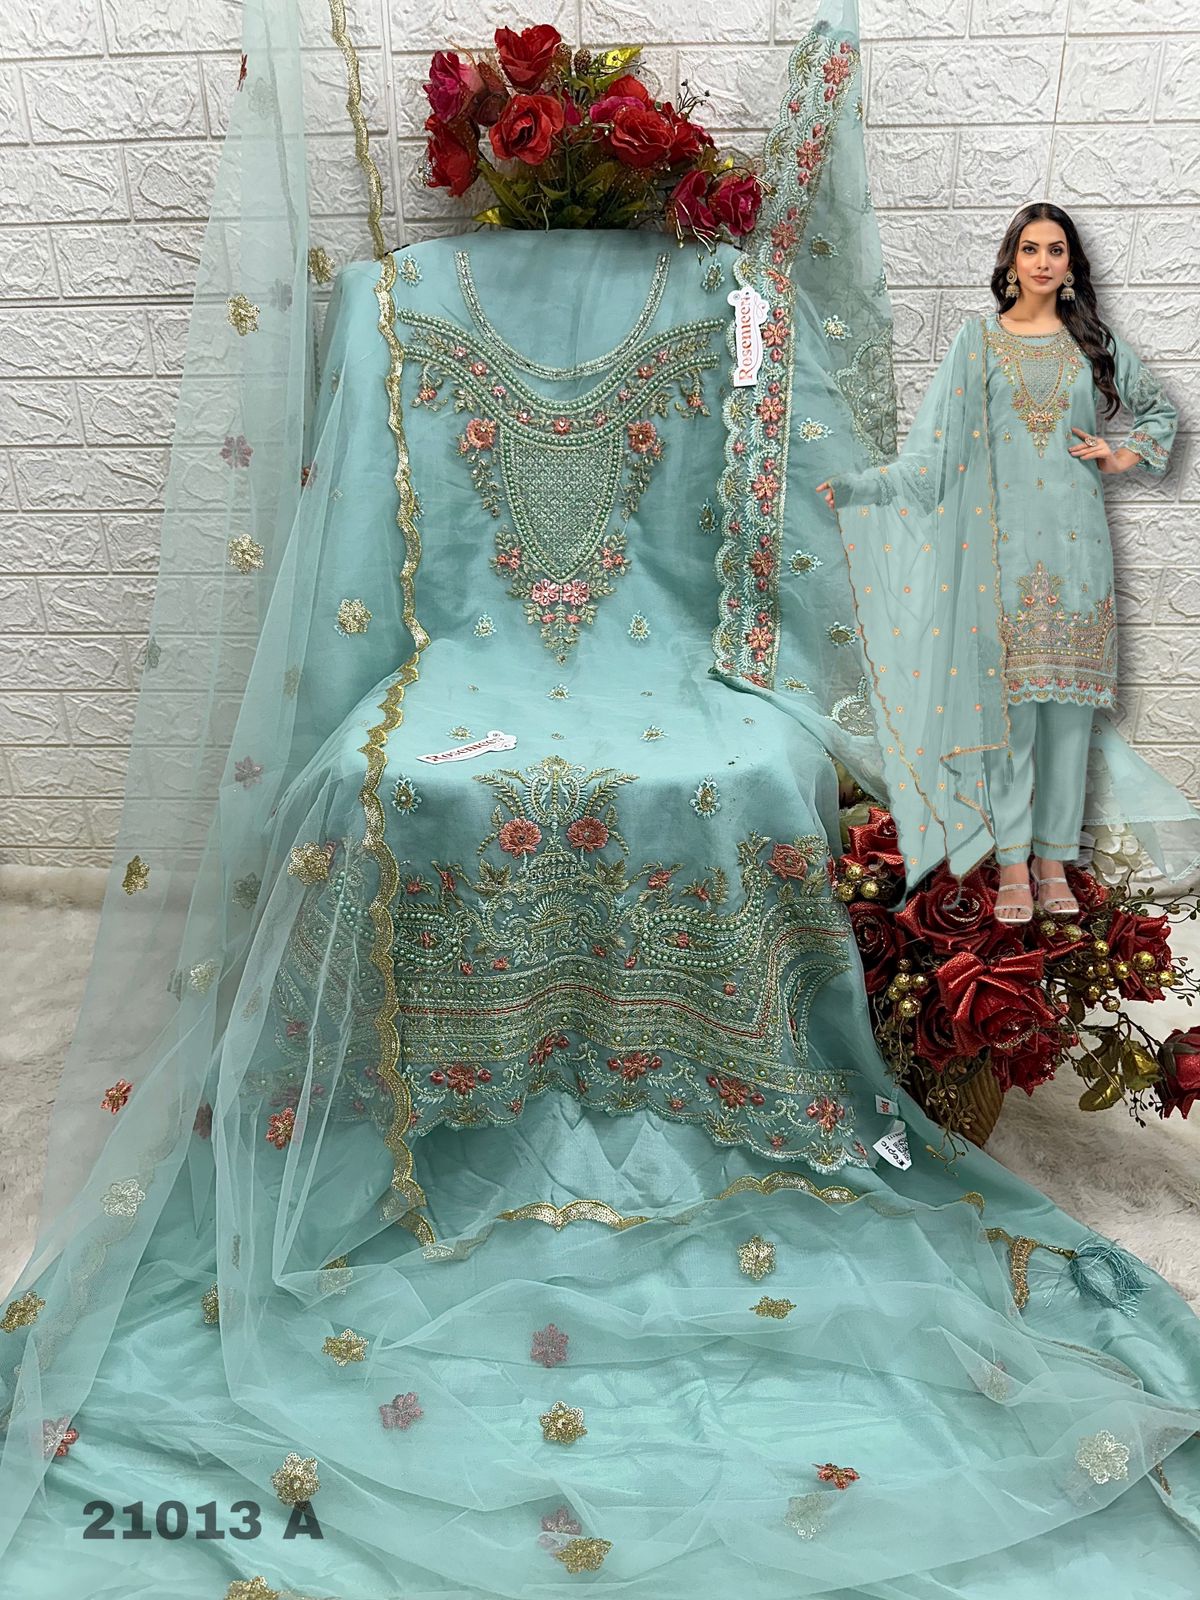 FEPIC IR 21013 IRAADAY PAKISTANI SUITS IN INDIA